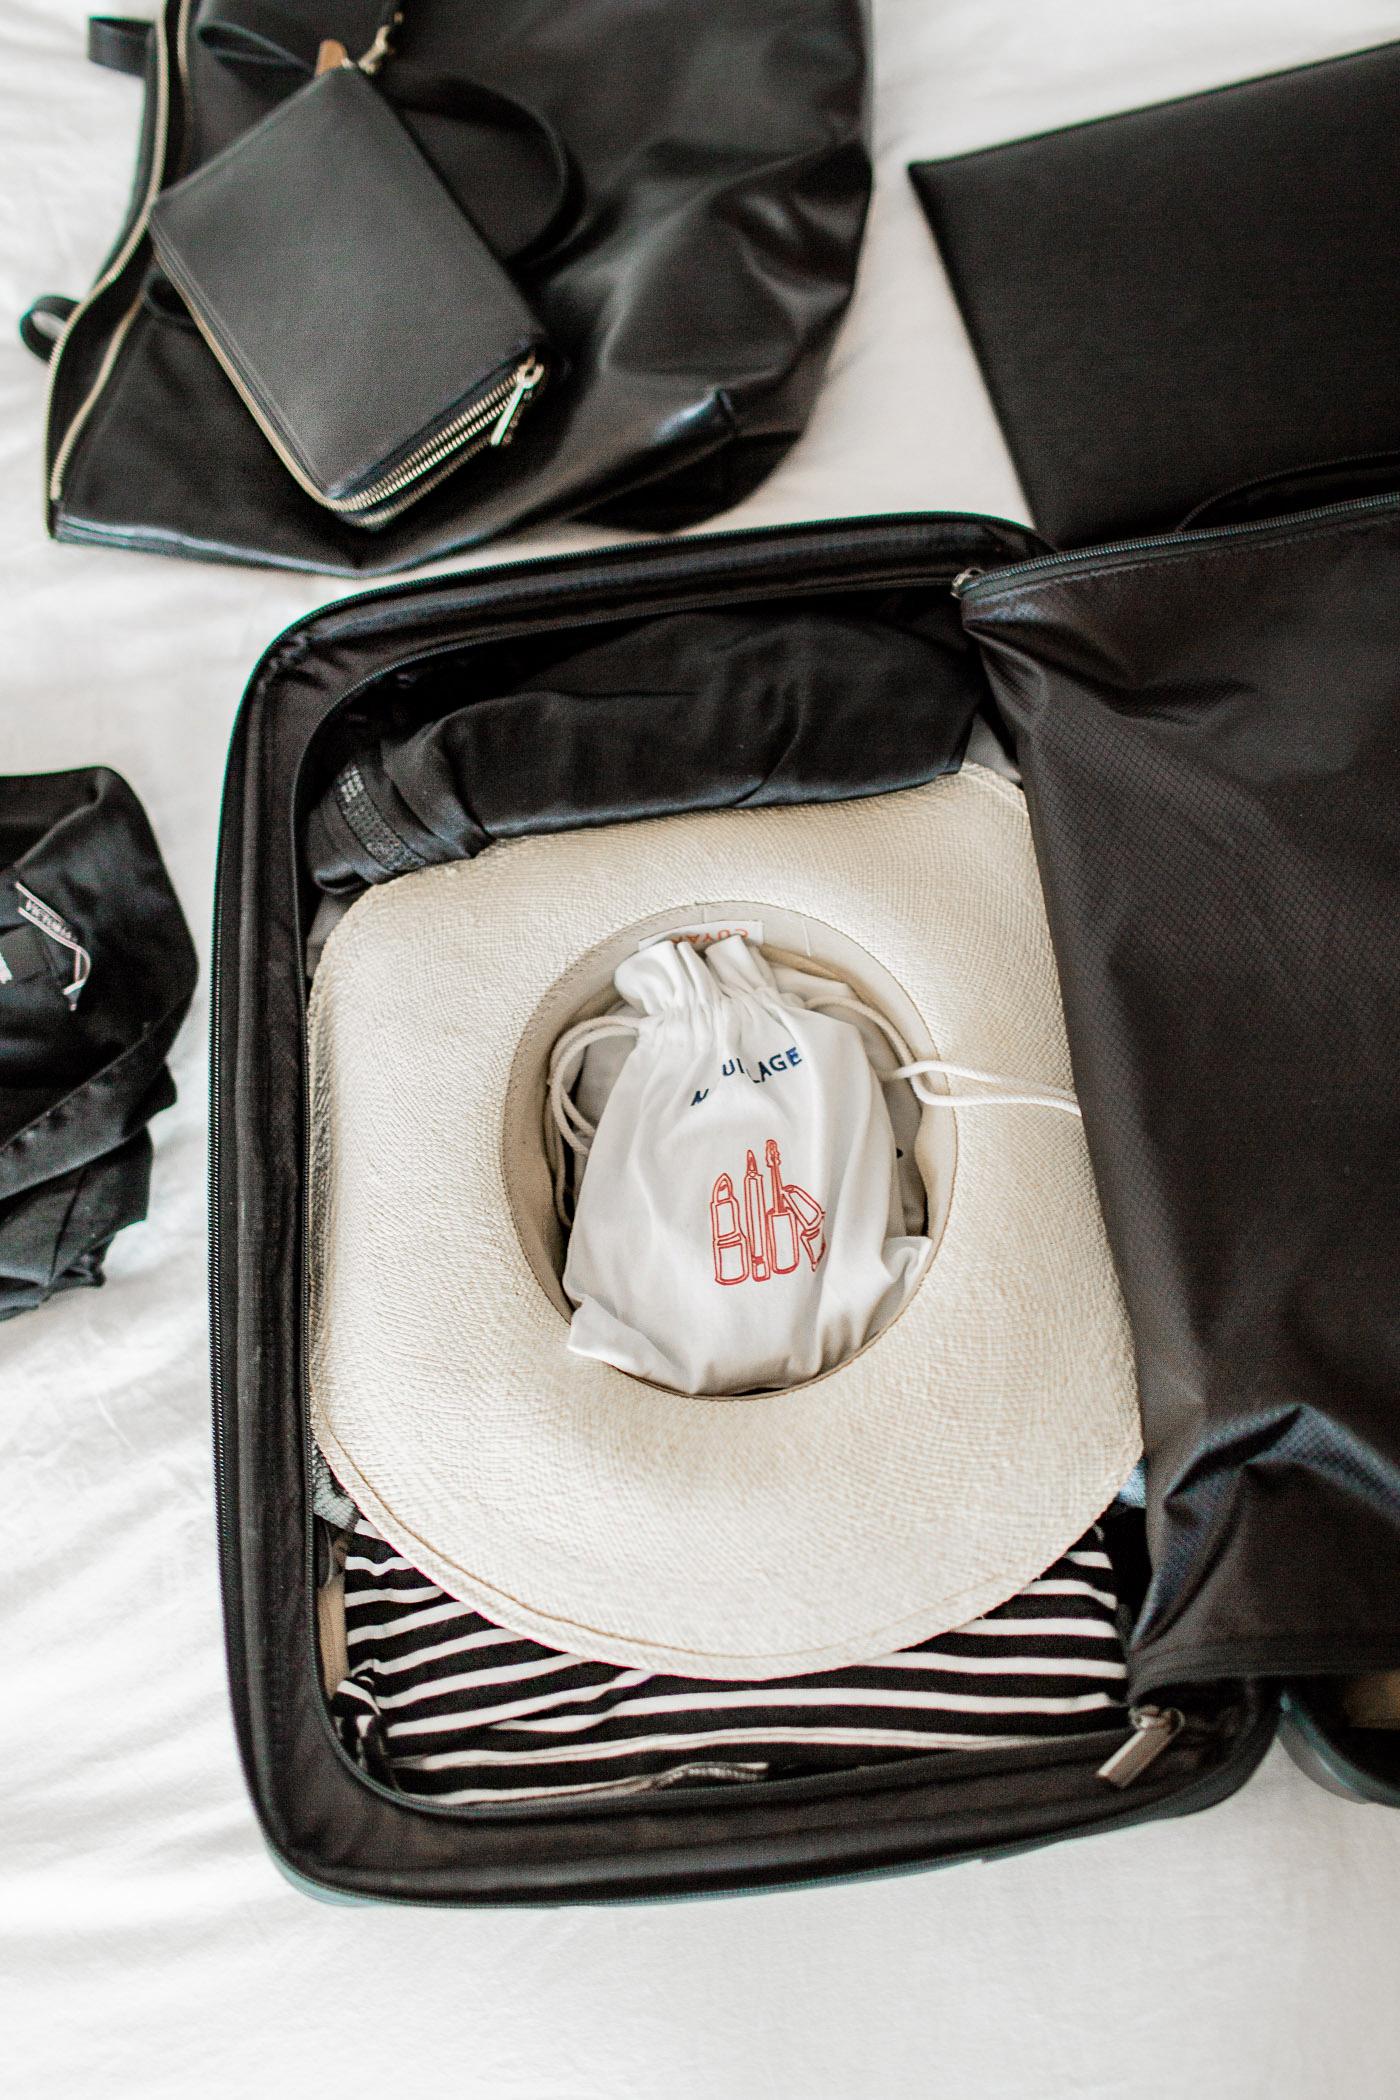 The hat packing trip, how to pack a hat in a suitcase without damaging it.